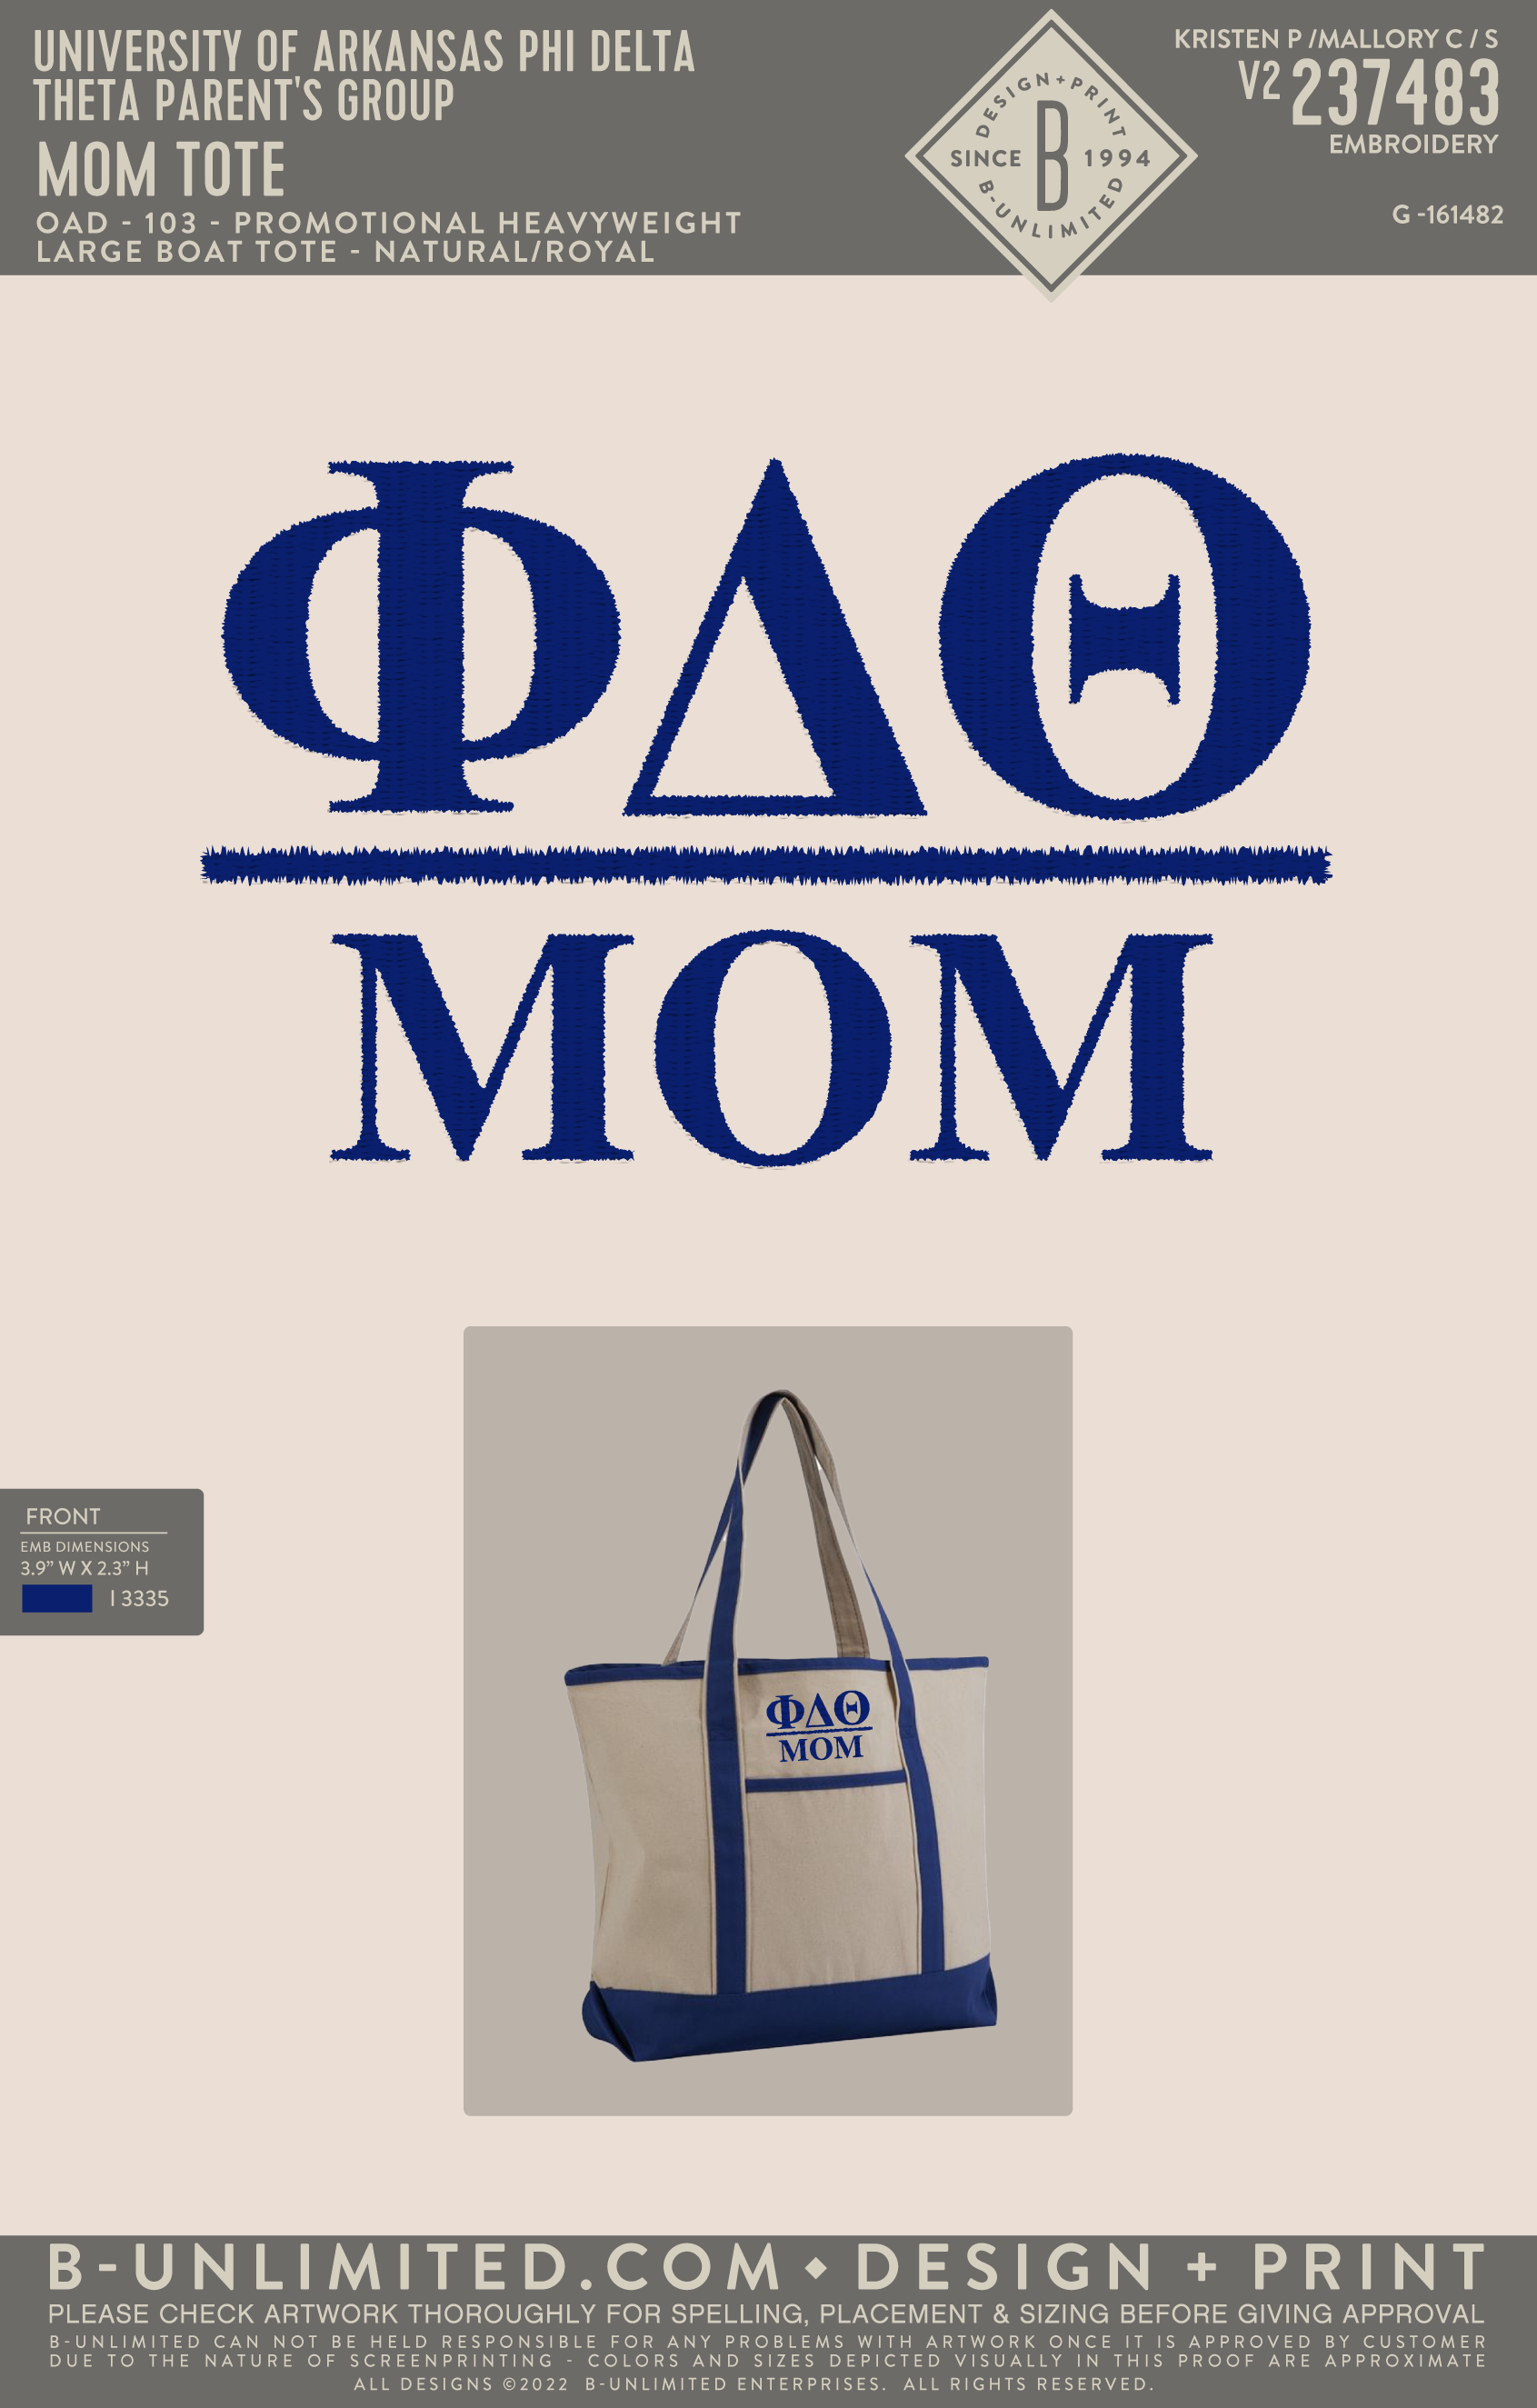 University of Arkansas Phi Delta Theta Parent's Group - Mom Tote - OAD - OAD103 - Promotional Heavy Weight Large Boat Tote - Natural/Royal